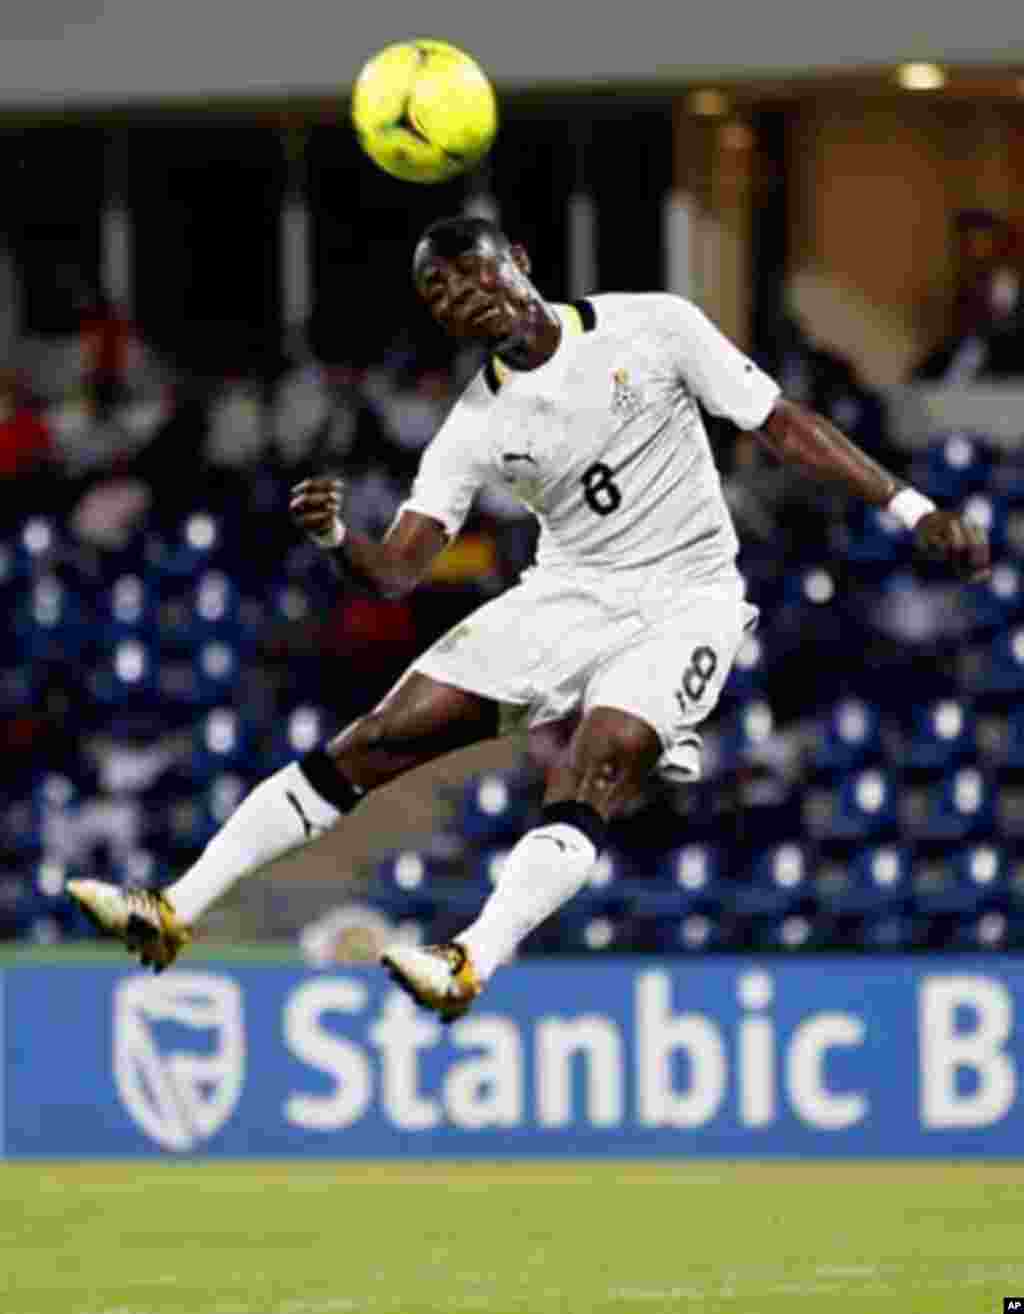 Ghana's Emmaneul Badu Agyemang jumps for the ball during their African Nations Cup quarter-final soccer match against Tunisia at Franceville stadium February 5, 2012.